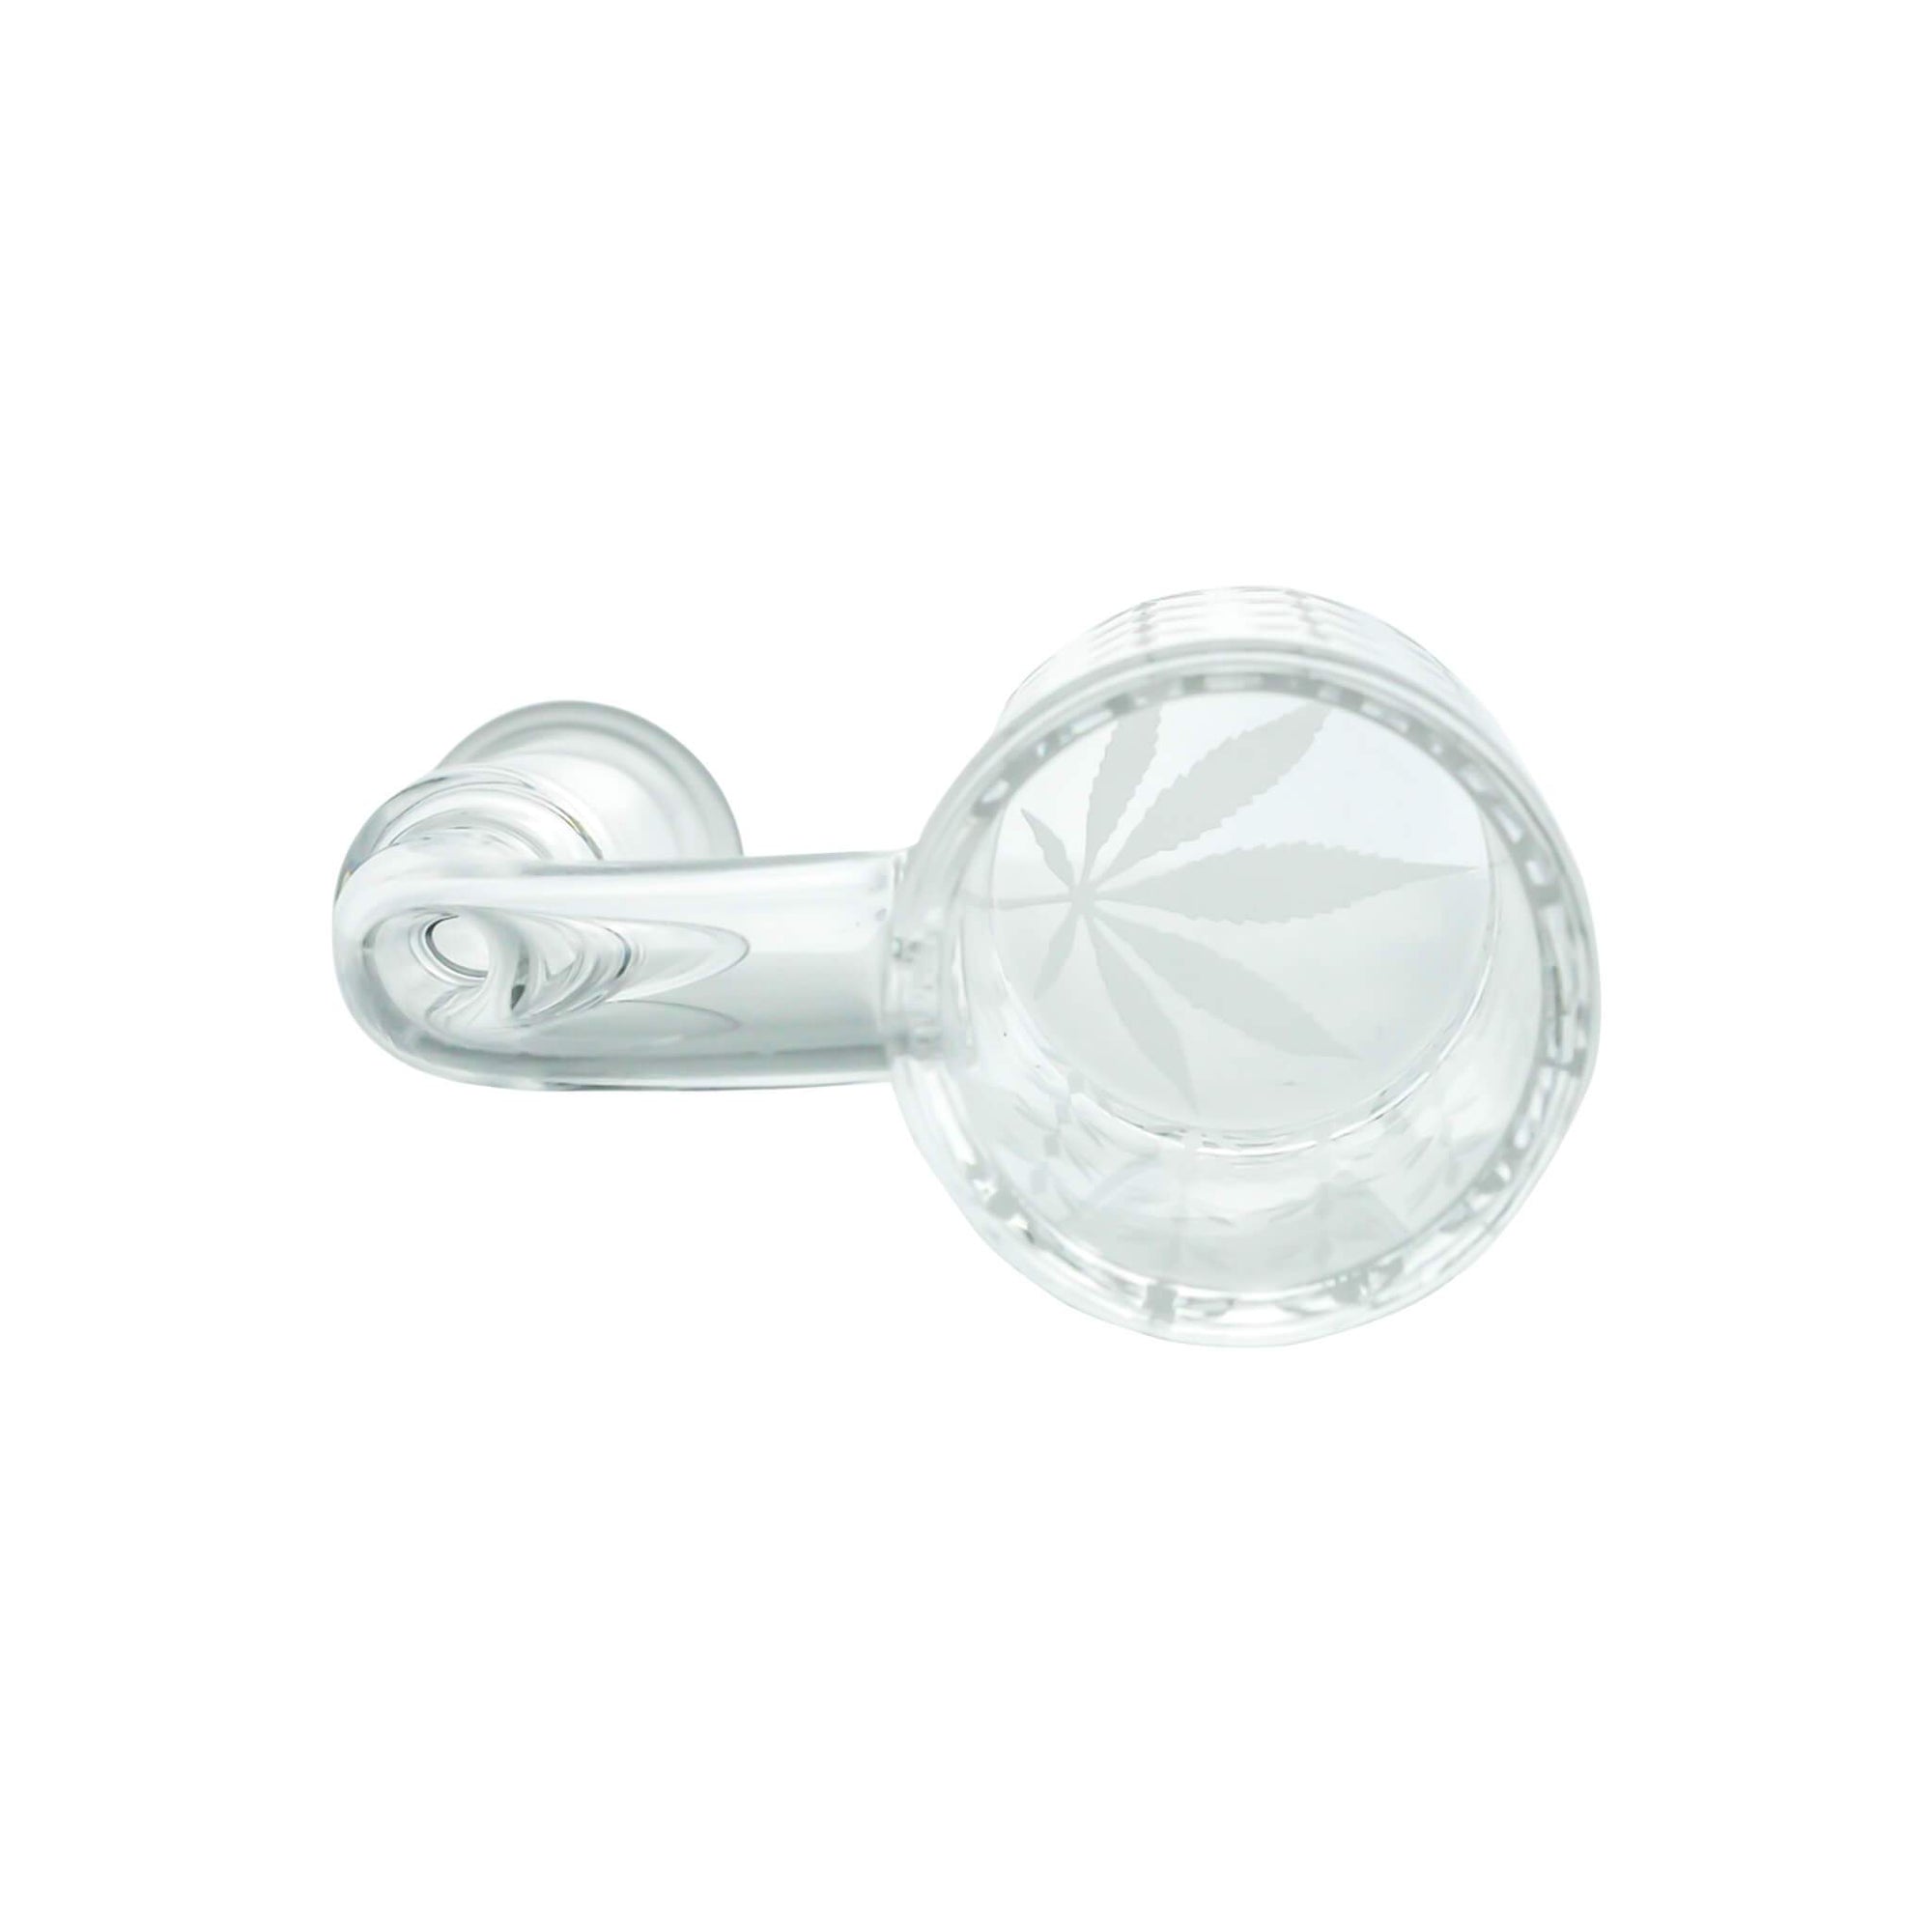 25mm Quartz Banger - Beveled Edge - Weed Leaf Bottom | Top Down View | the dabbing specialists